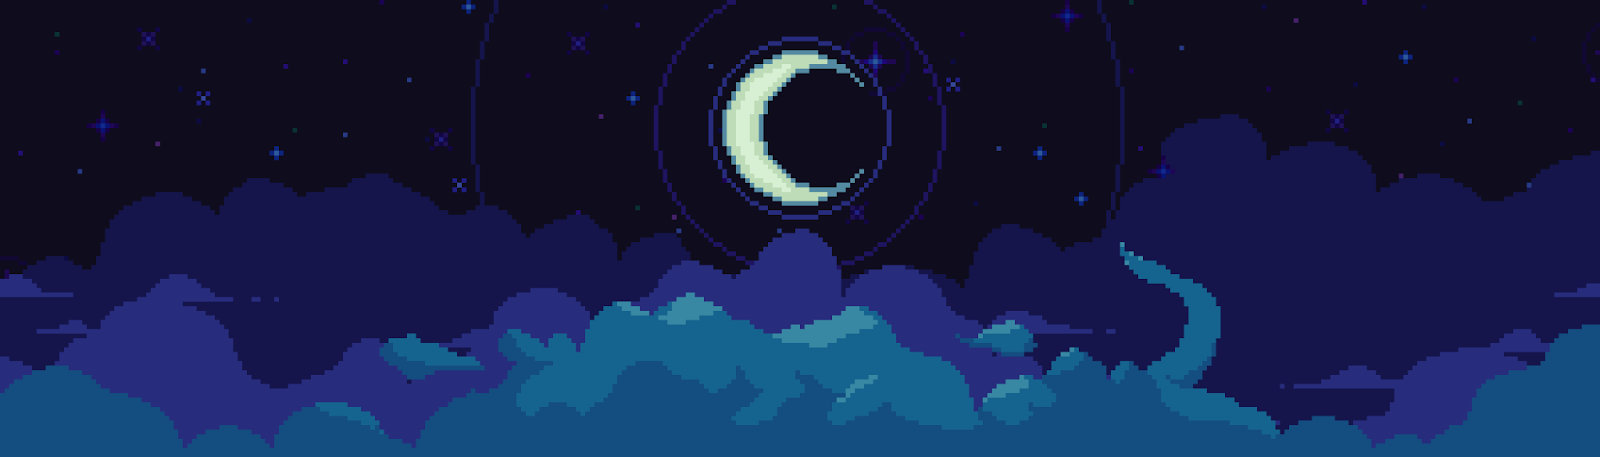 Moon and sky design from Moonbirds.